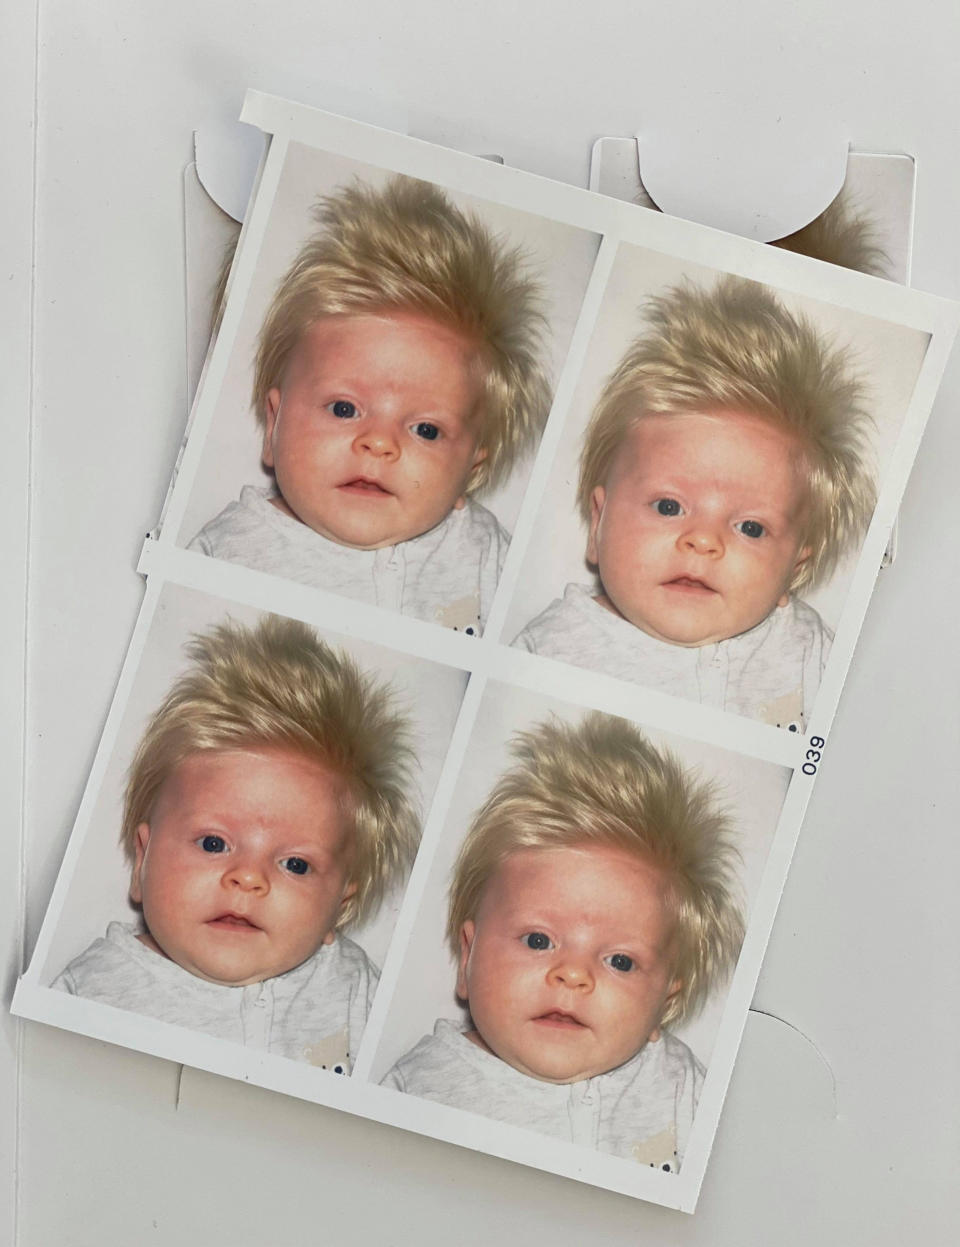 David&#39;s passport photos at just 2 months old. (Caters)